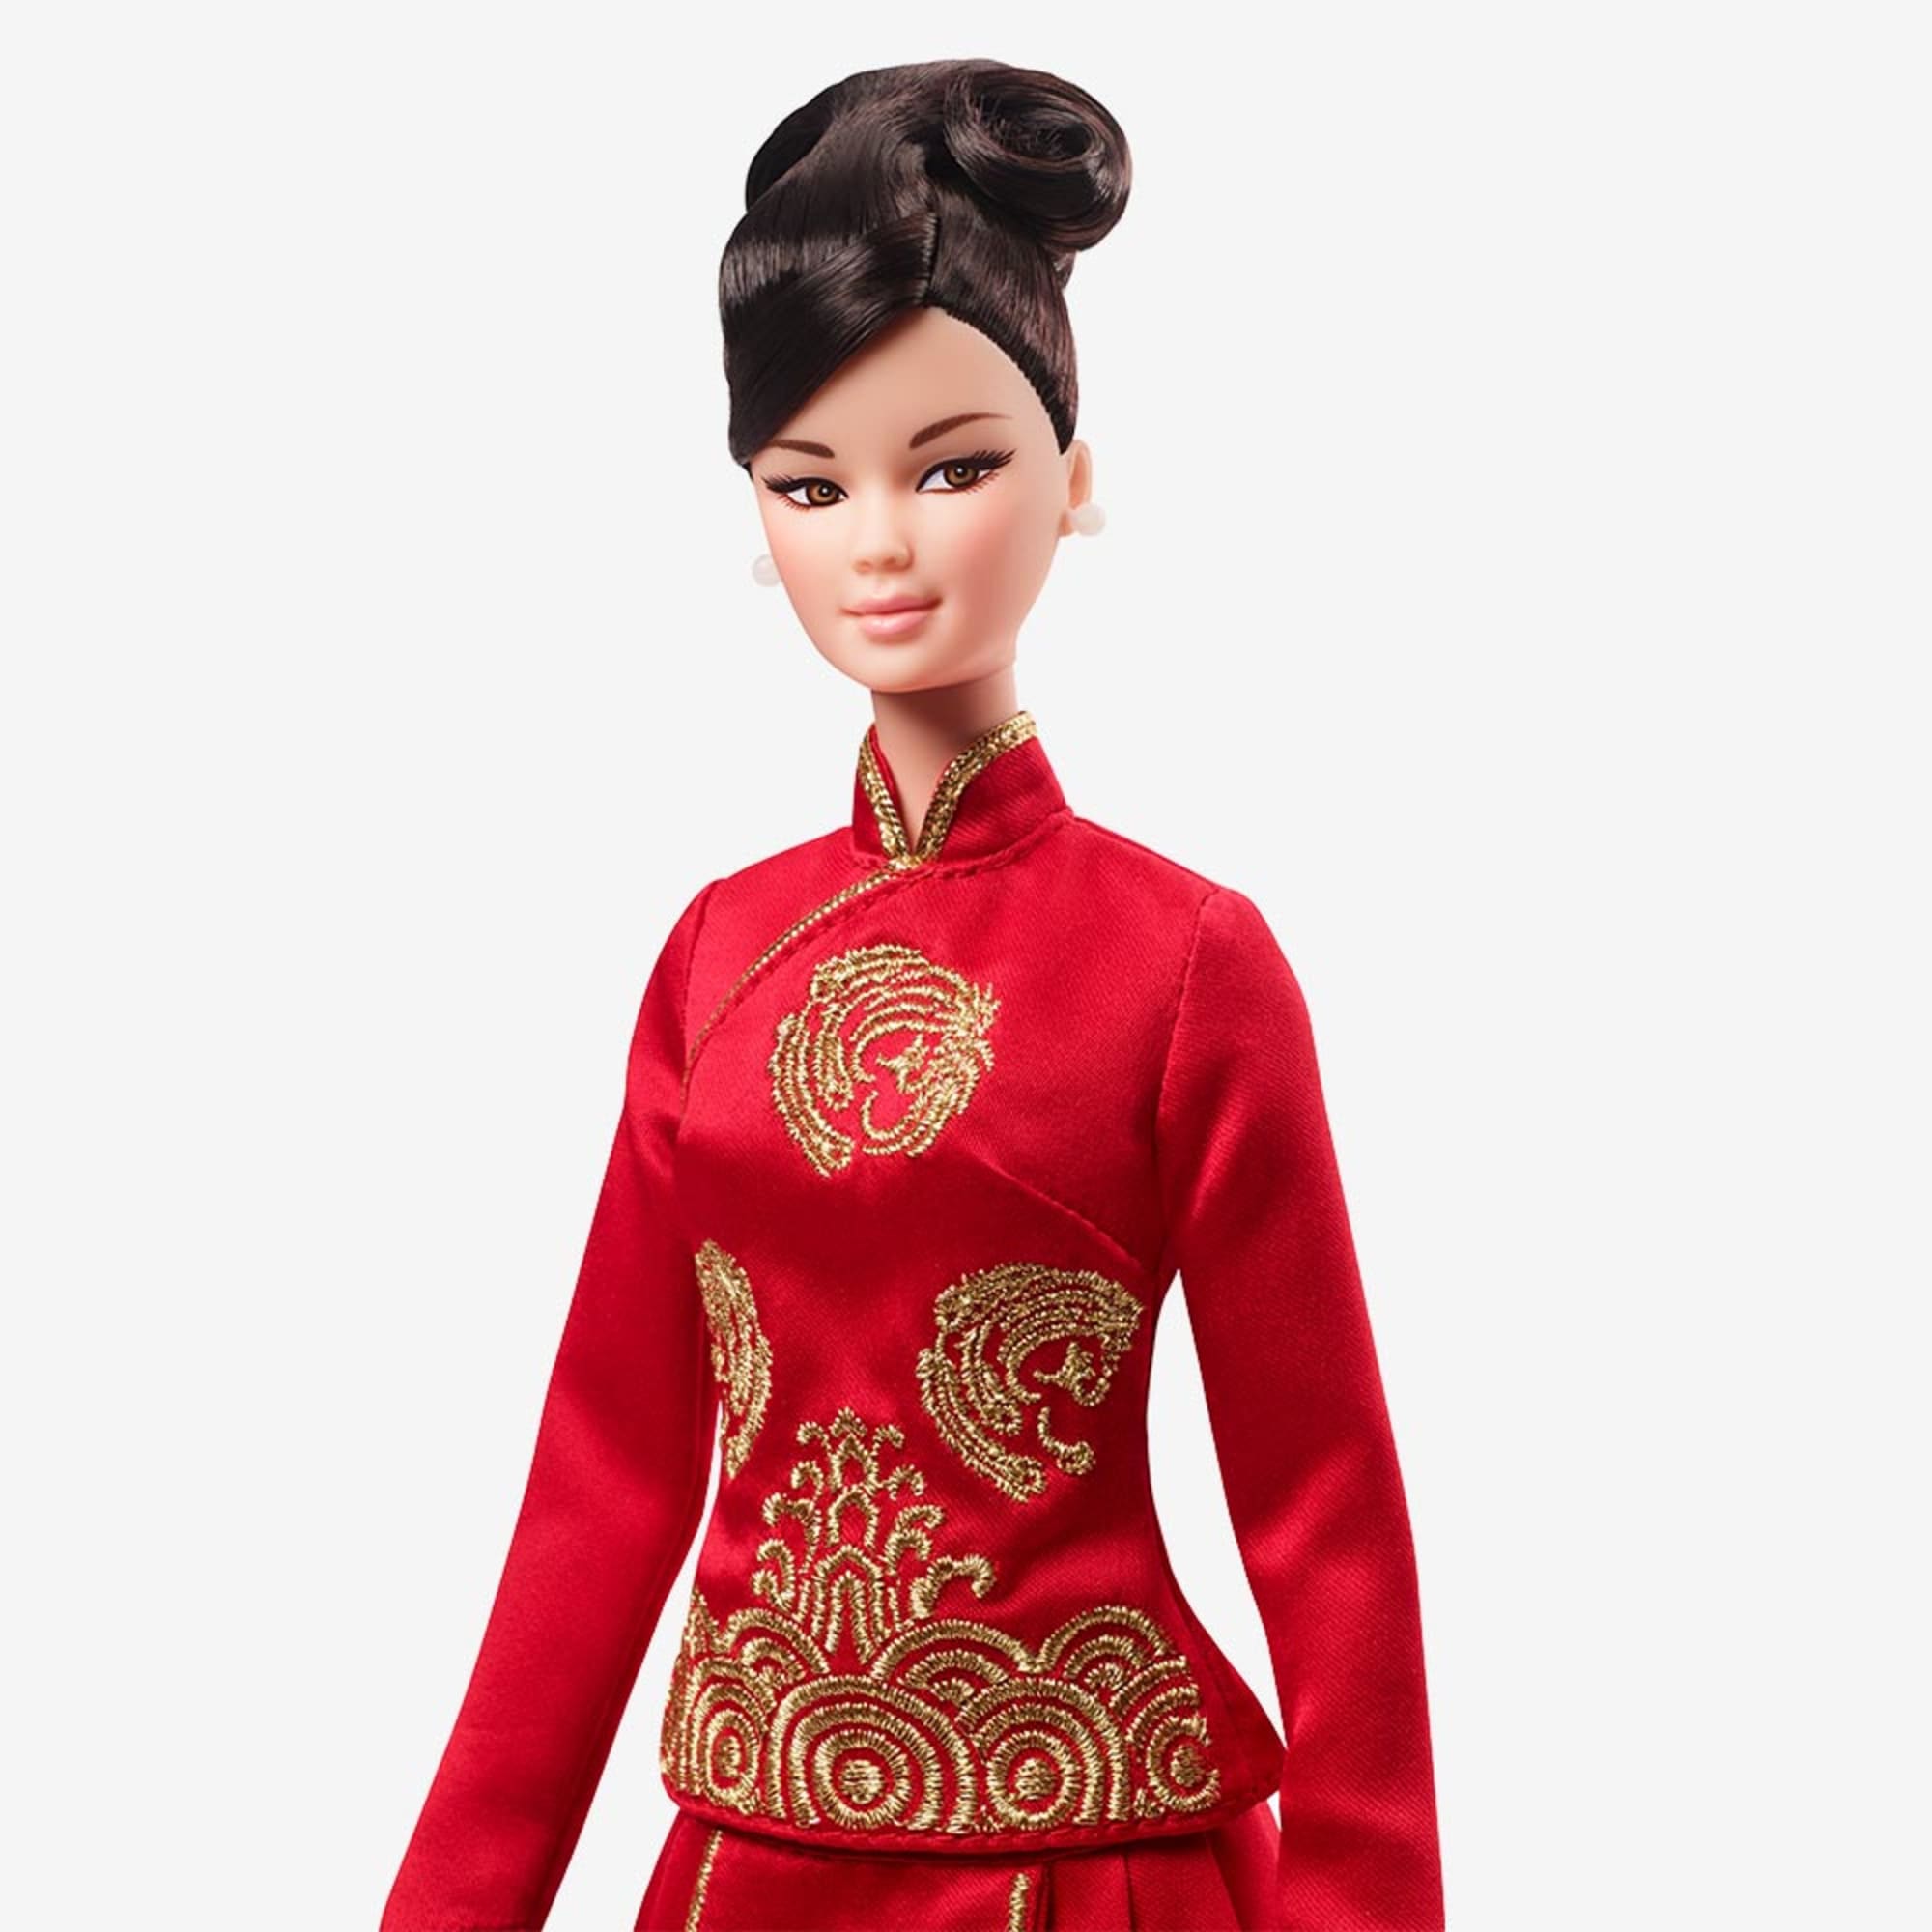 Barbie Lunar New Year Doll Designed by Guo Pei